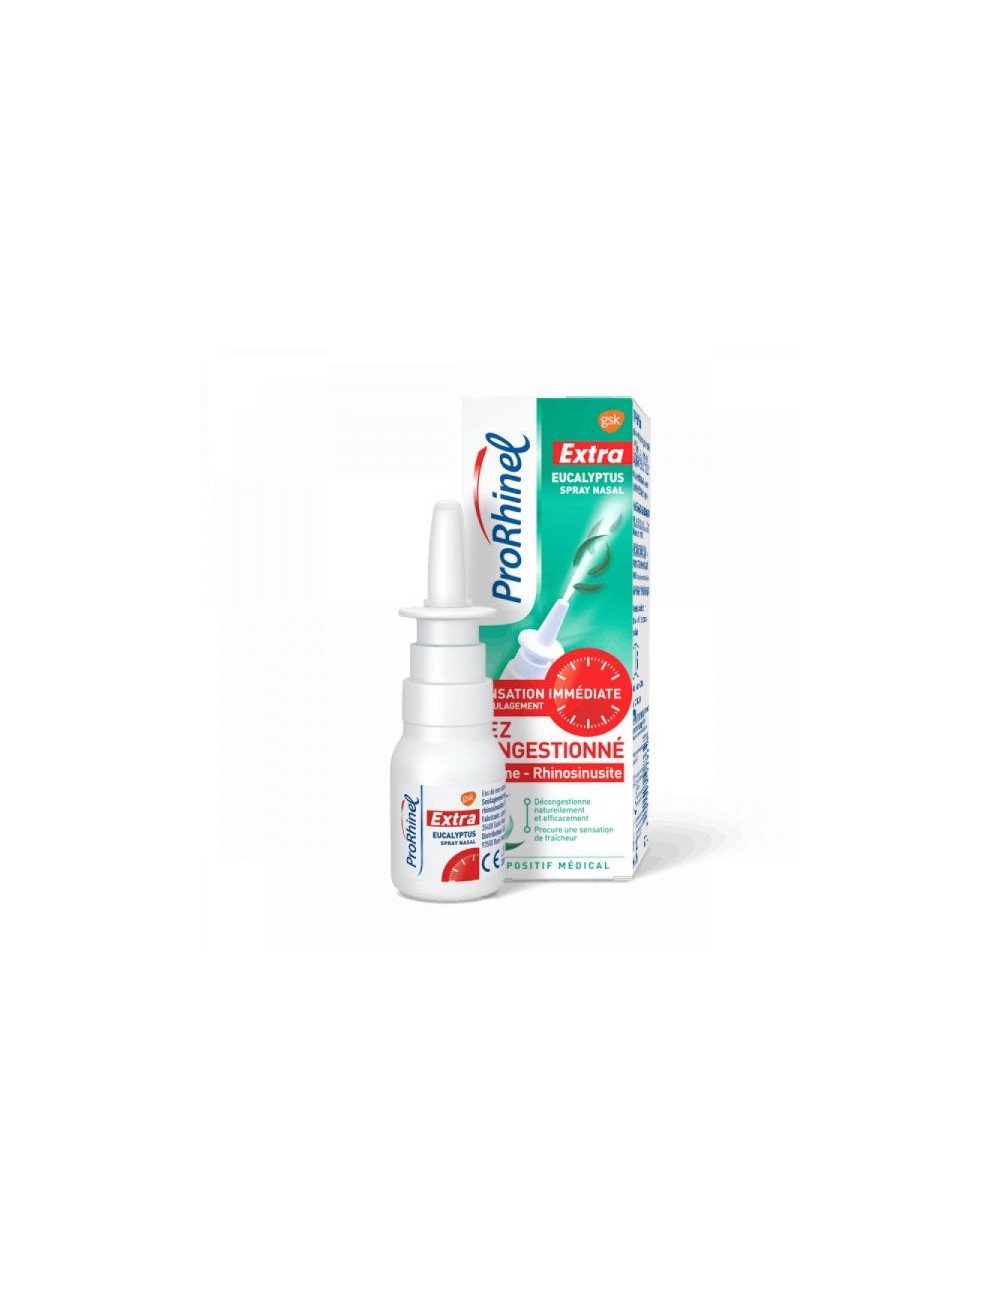 Prorhinel nasal spray infants and young children 100ml - GSK